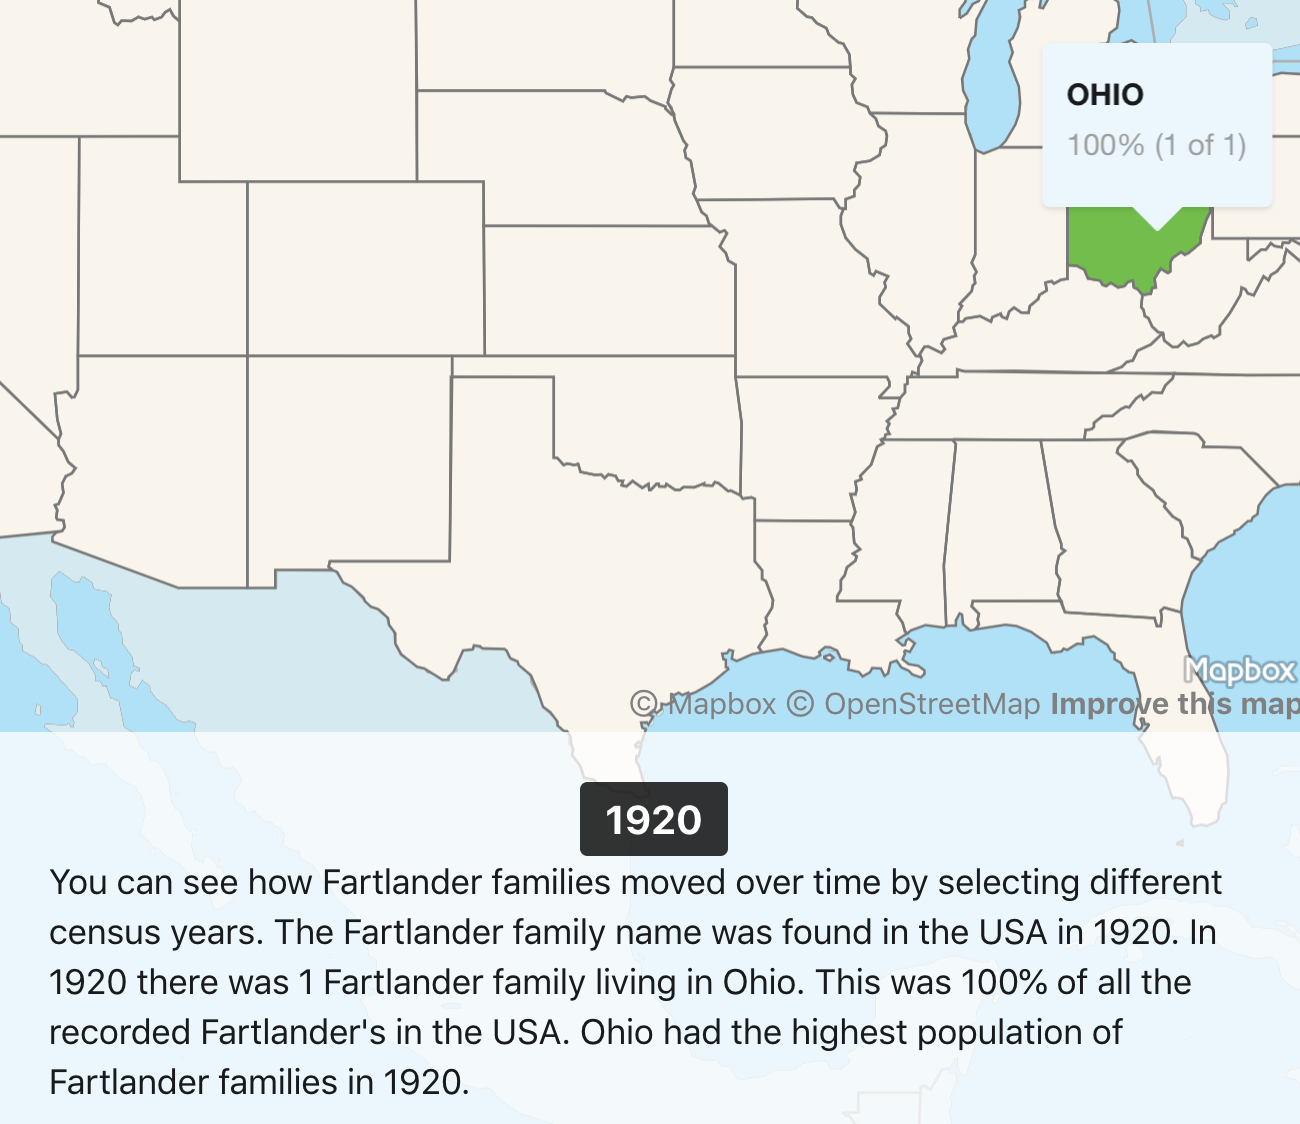 map - Ohio 100% 1 of 1 Mapbox OpenStreetMap Improve this map 1920 You can see how Fartlander families moved over time by selecting different census years. The Fartlander family name was found in the Usa in 1920. In 1920 there was 1 Fartlander family livin